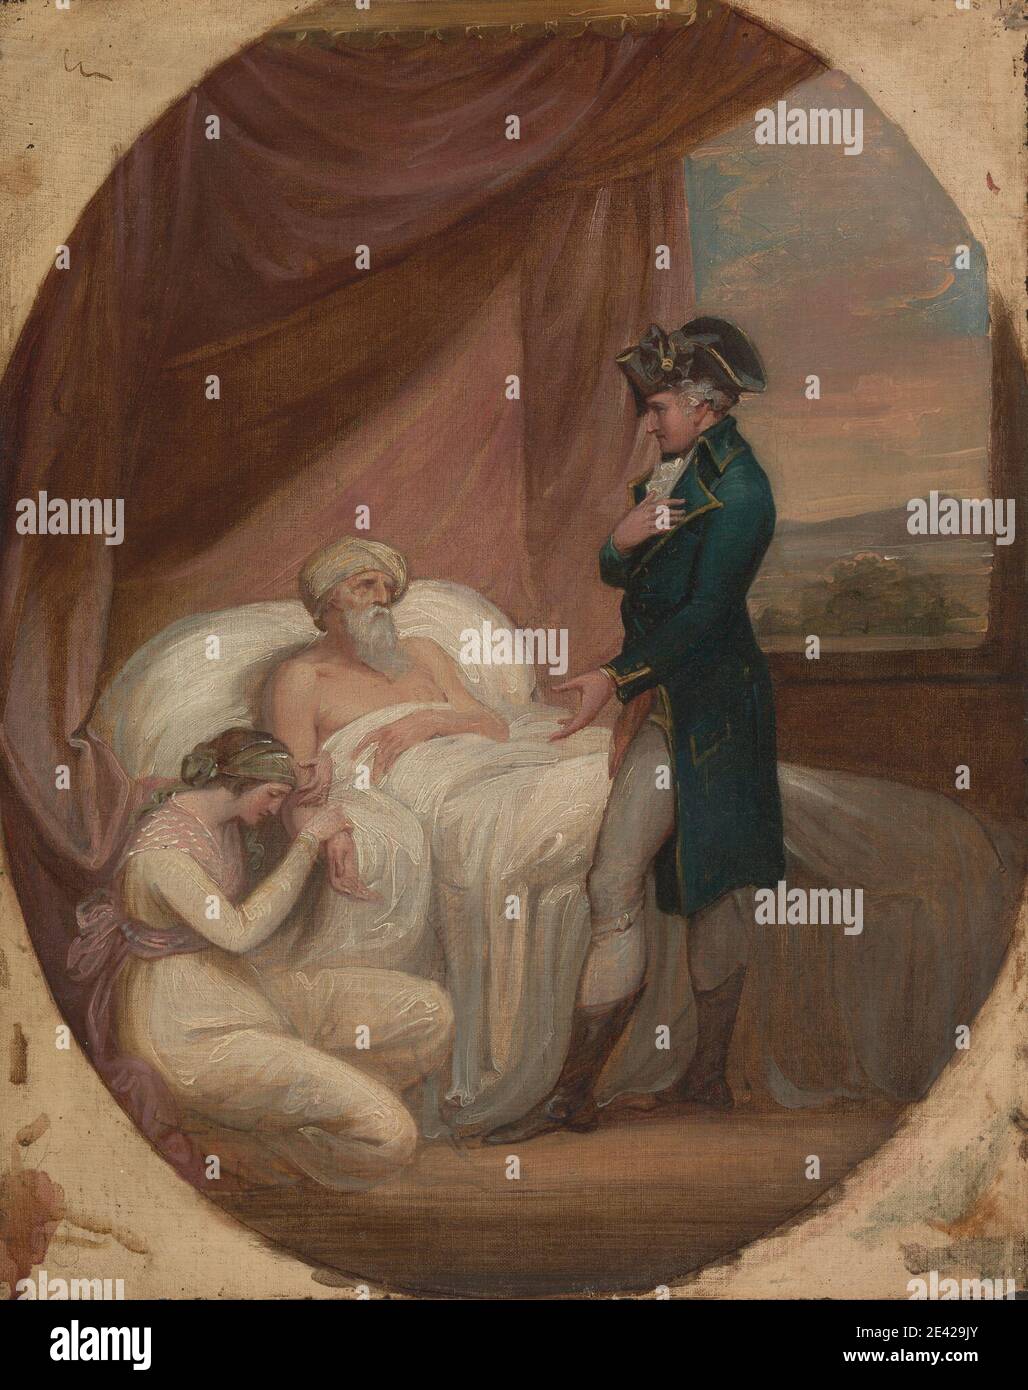 Thomas Kirk, 1765â€“1797, Irish, The Brahmin Committing his Daughter Coraly to the Care of Blandford, ca. 1793. Oil on canvas.   beard , bed , blankets , boots , brahmin , chemise dress , costume , curtains , daughter , death , educator , elderly , father , gesture , Hindu , Hinduism , historical subject , man , mountains , oval , preacher , scholar , shawls , tricorne , uniform , window , woman Stock Photo